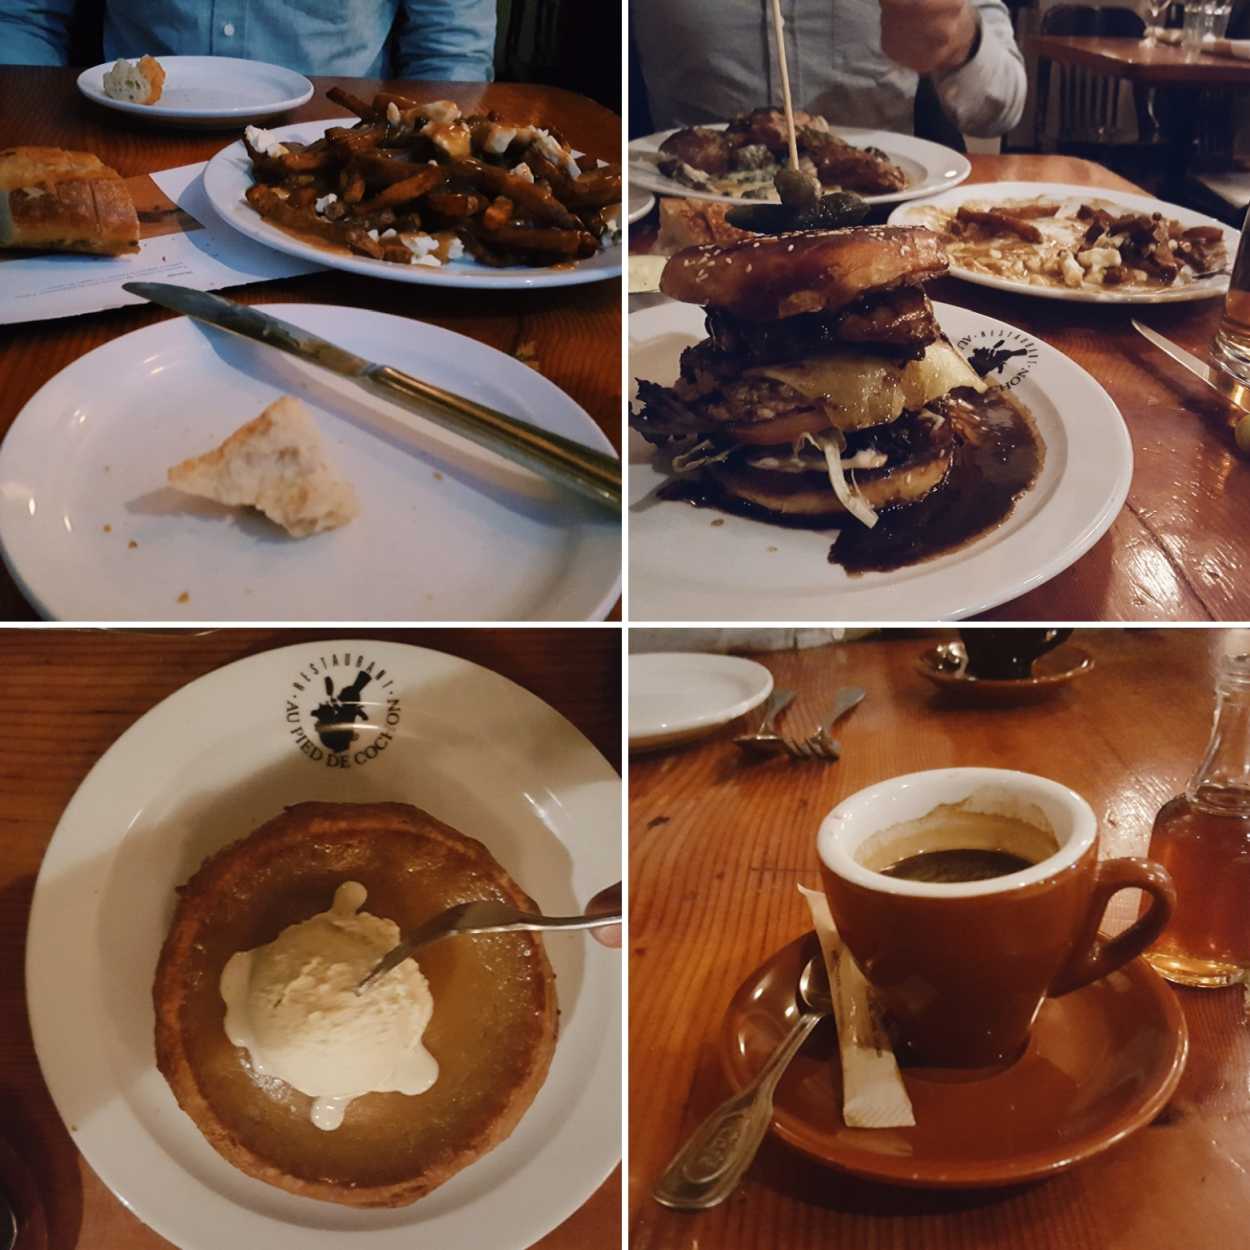 A collage of a meal from Au Pied du Cochon